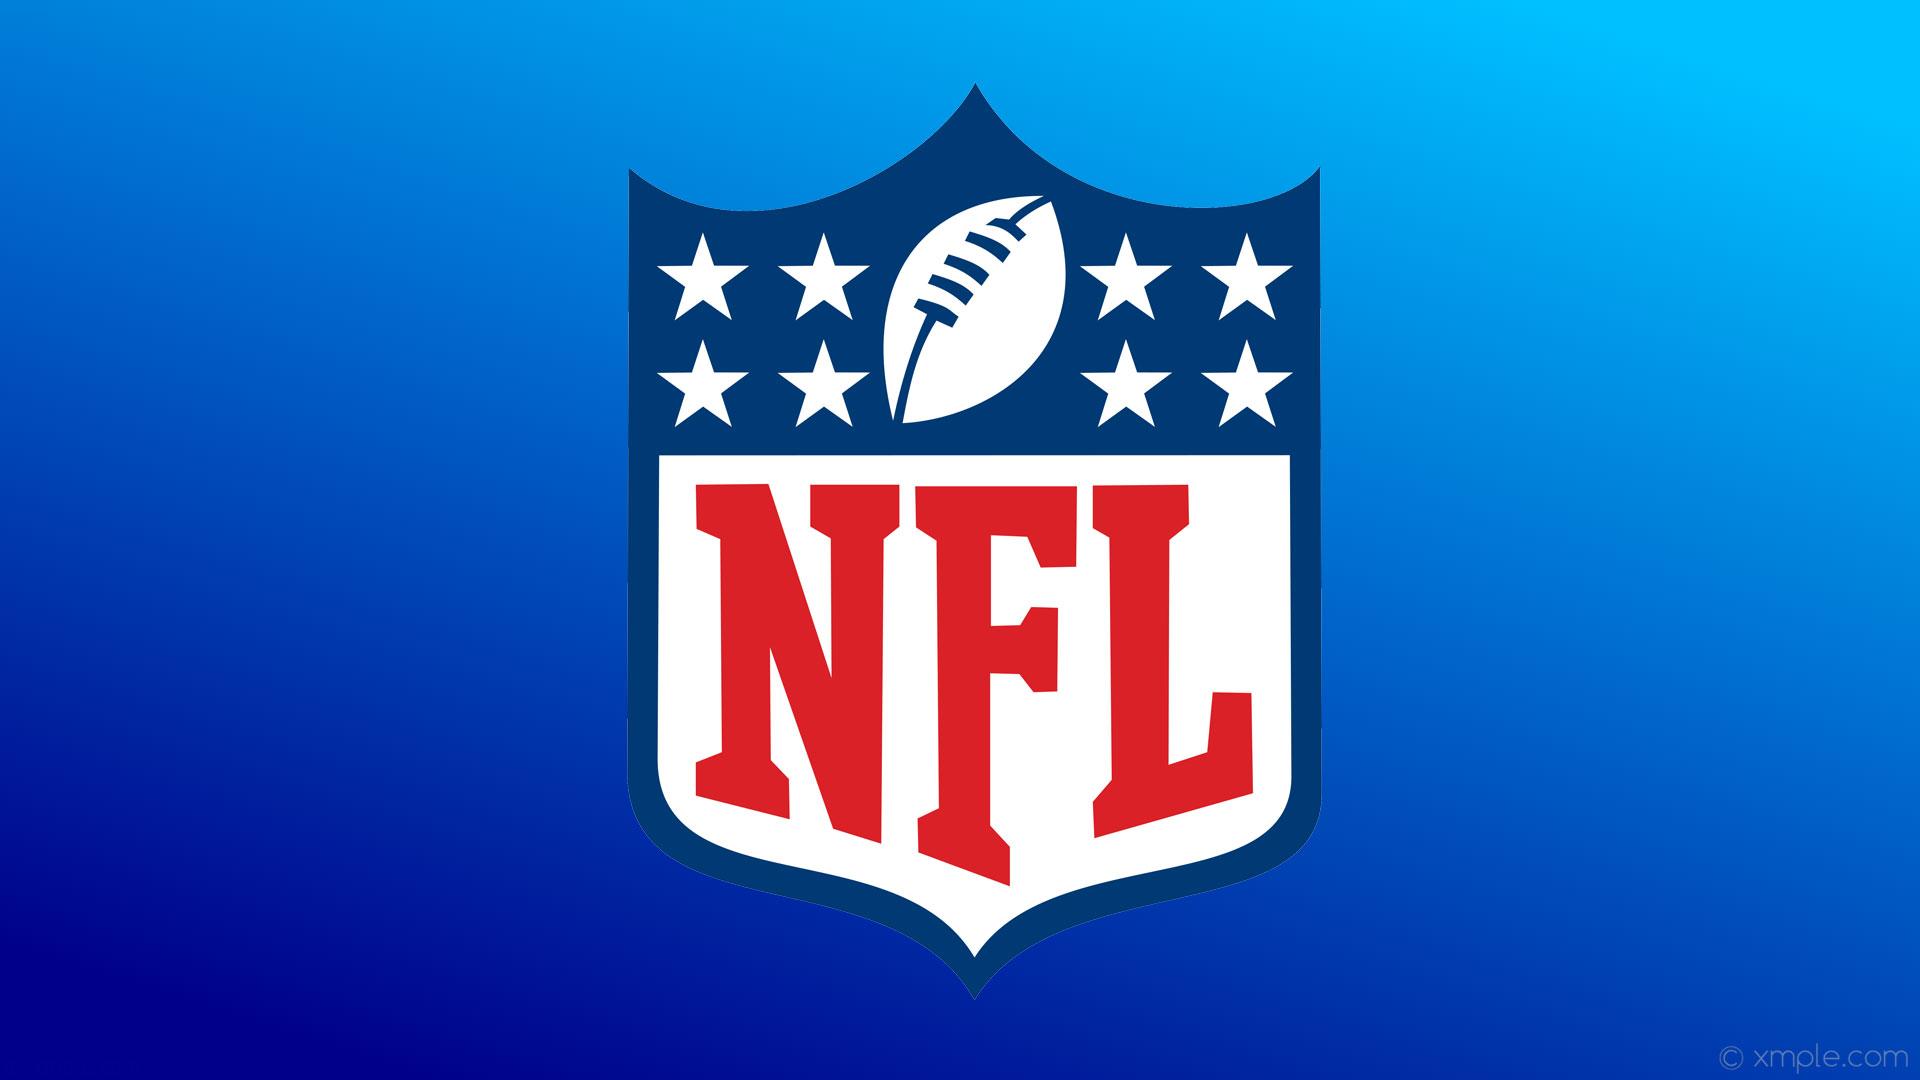 NFL Logo - NFL's 2018 Opening Sunday Games Schedule & What To Watch